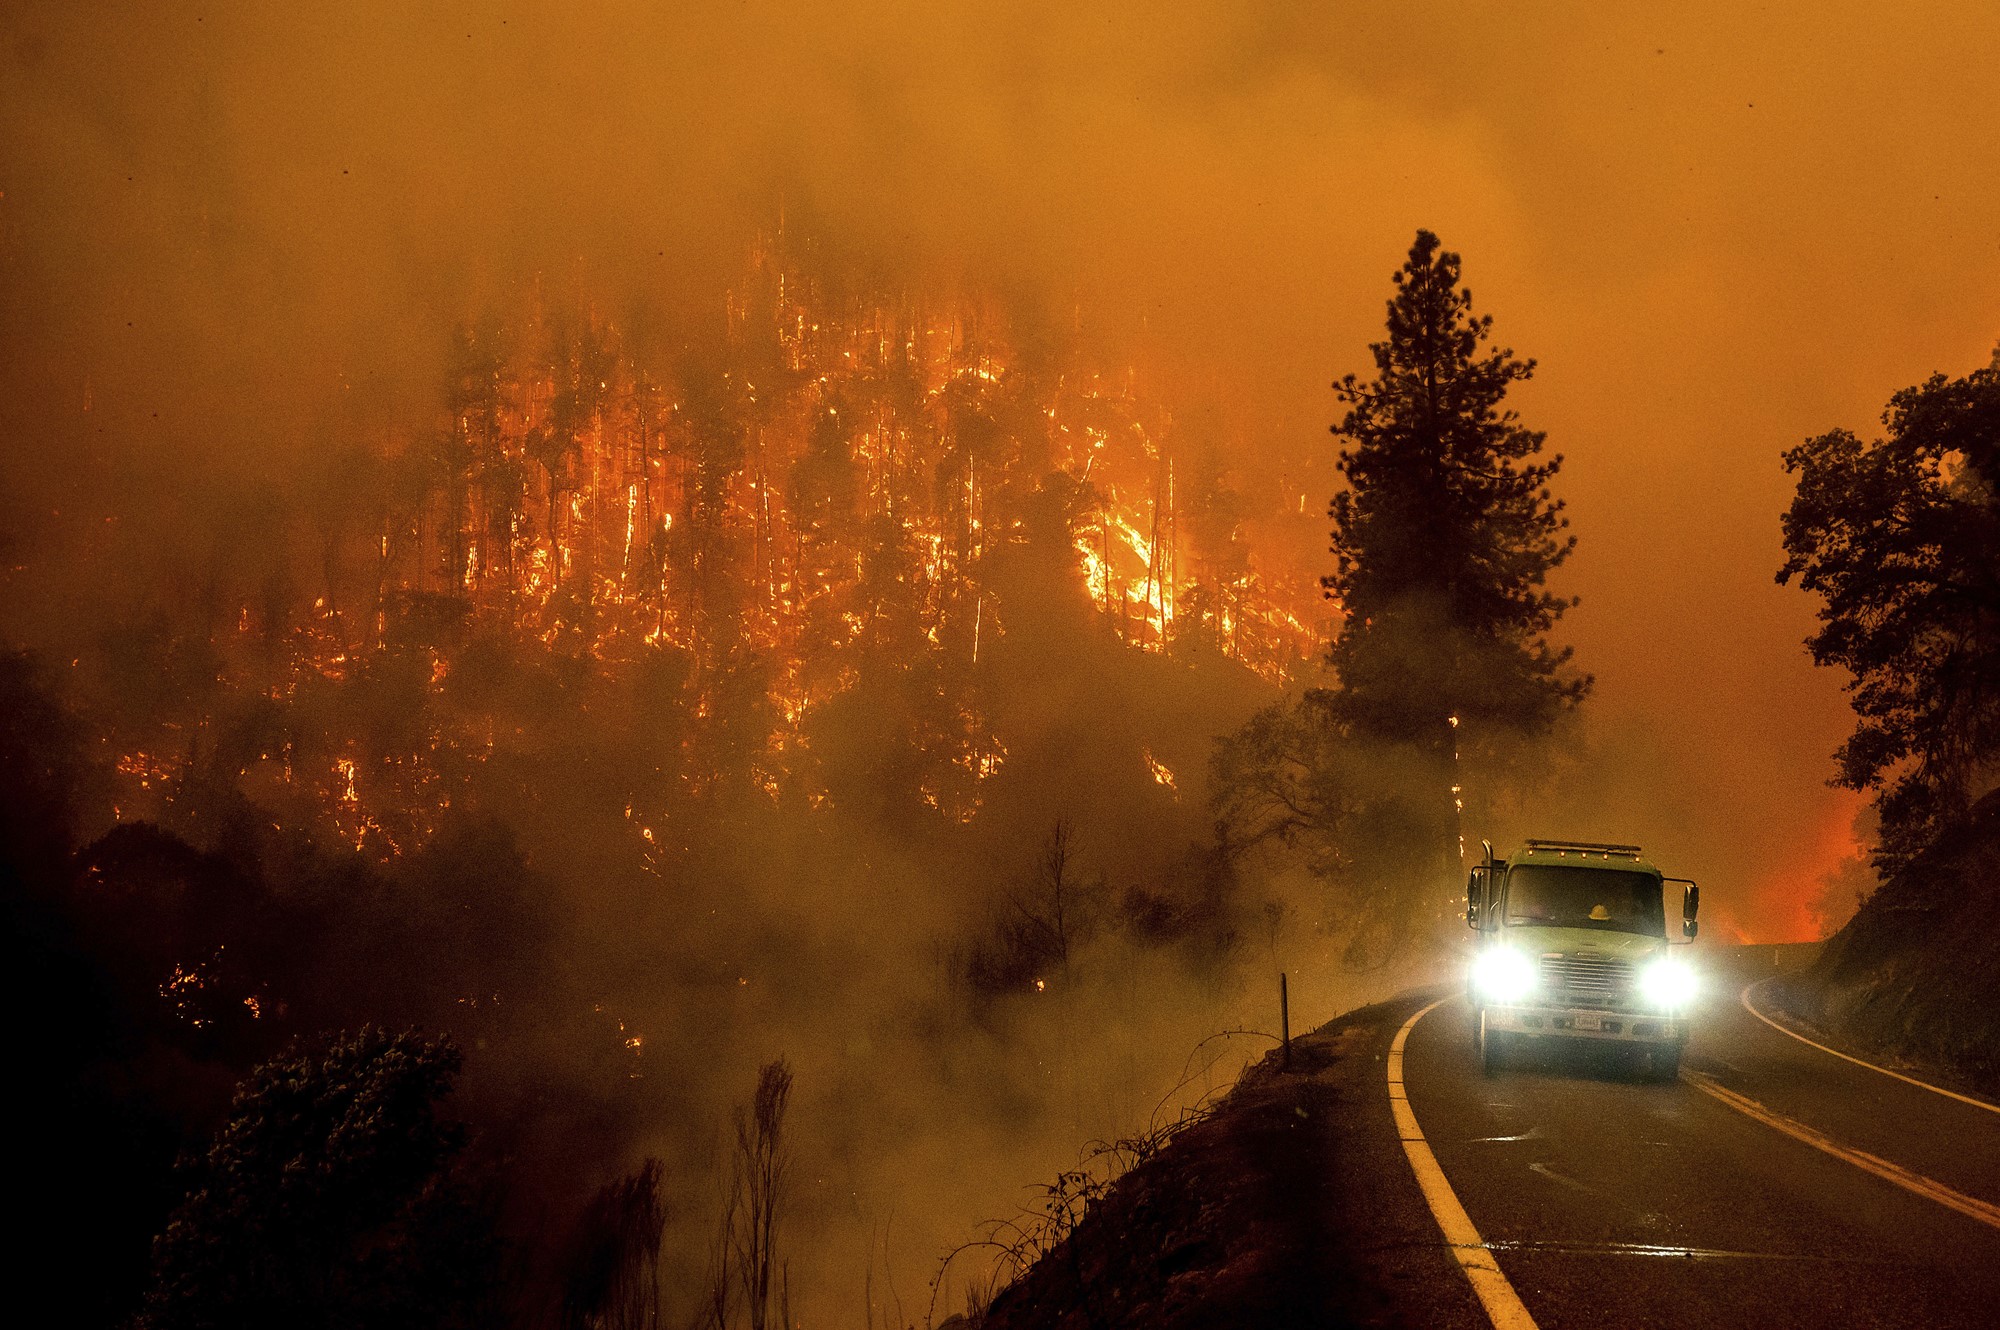 A firetruck drives along a road with burning trees and a glowing orange sky in the background.